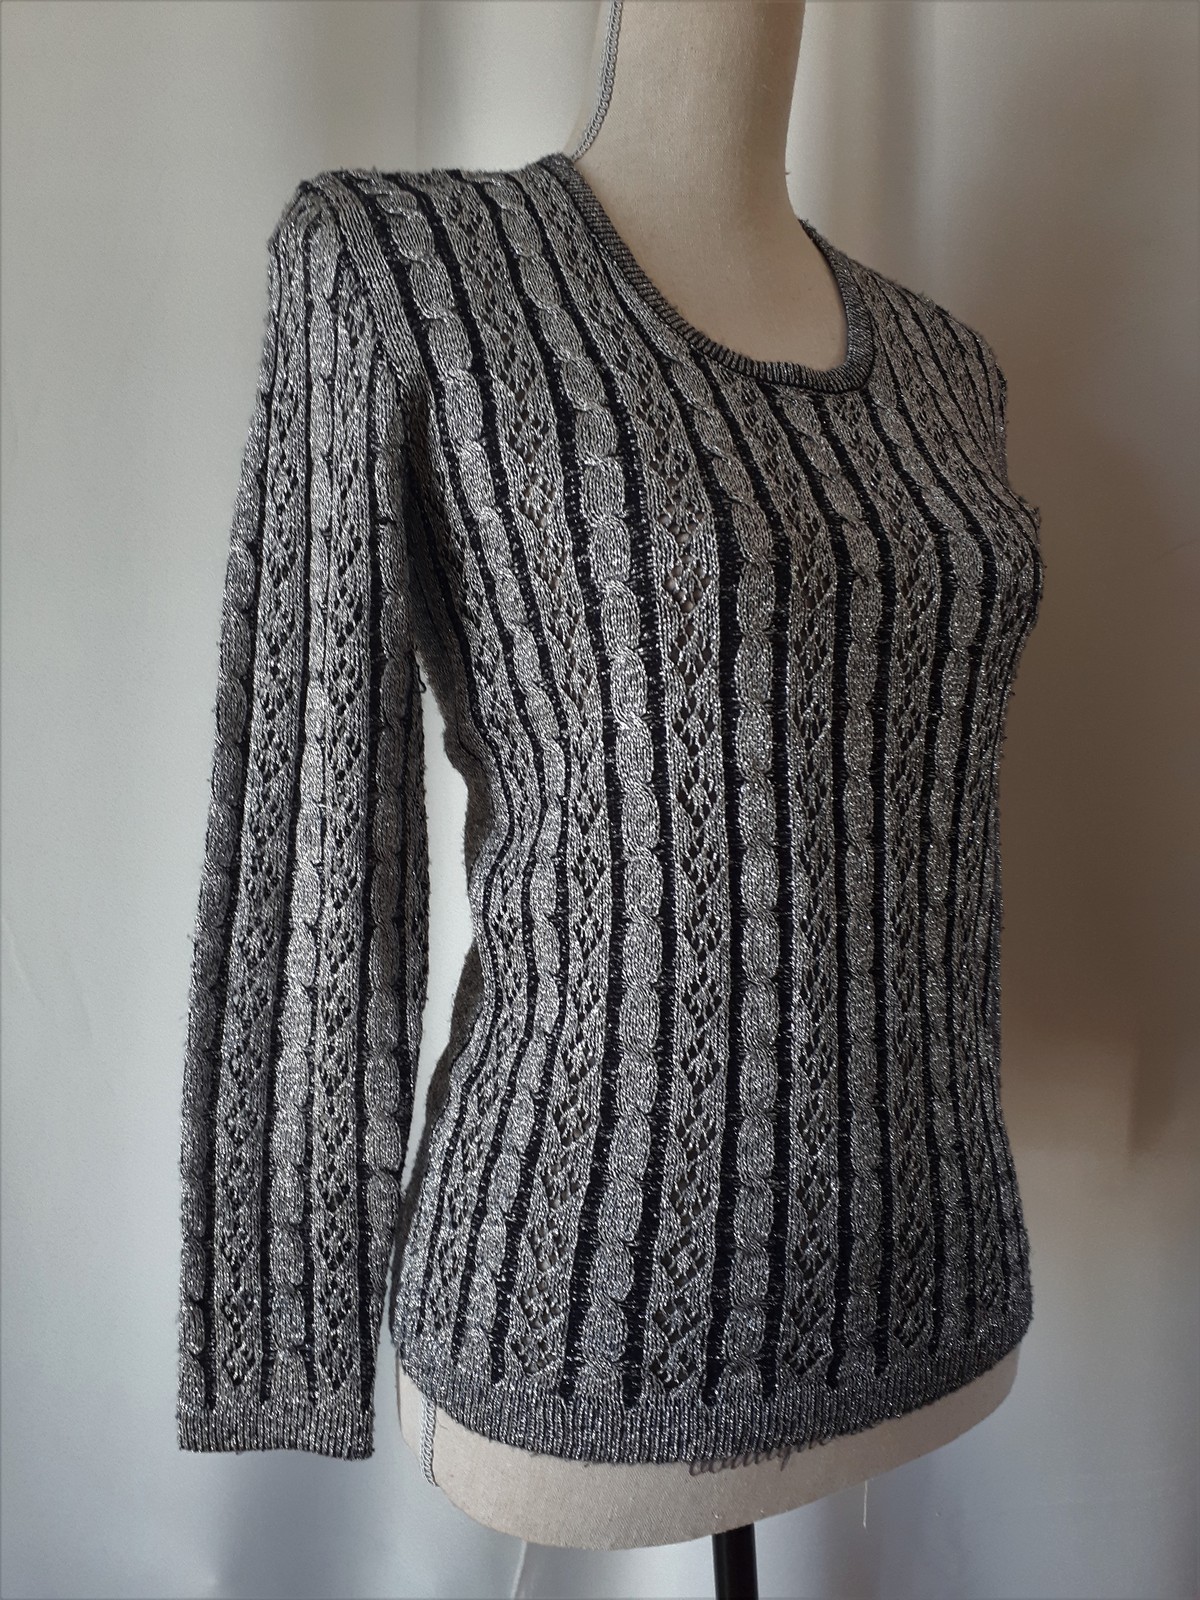 Vintage 1960s Silver Lurex Knit Cable Sweater Sz Small - Sweaters